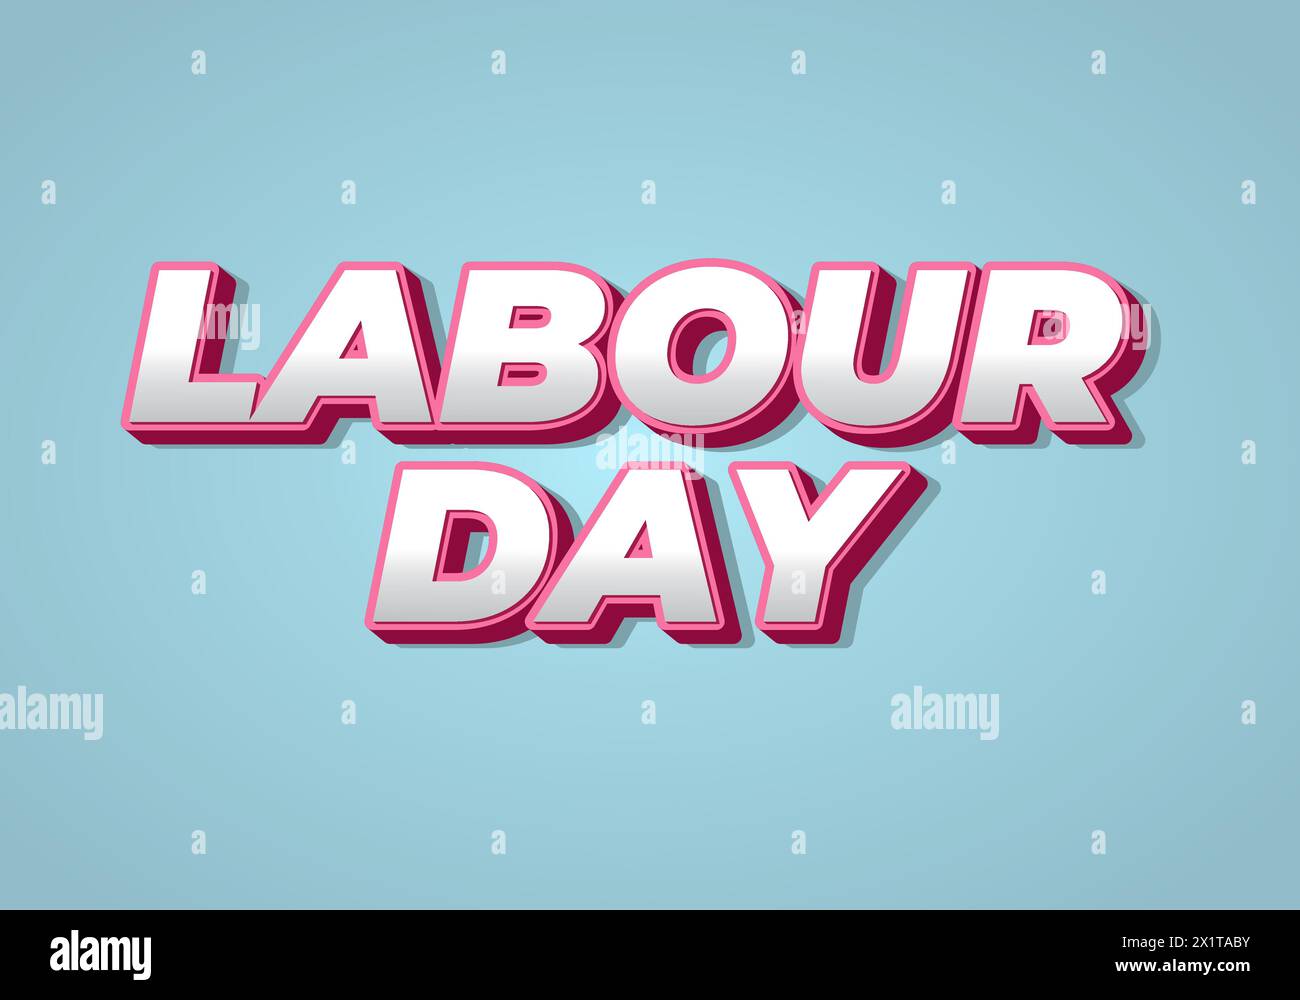 Labour day. Text effect design in eye catching colors and 3D look Stock Vector